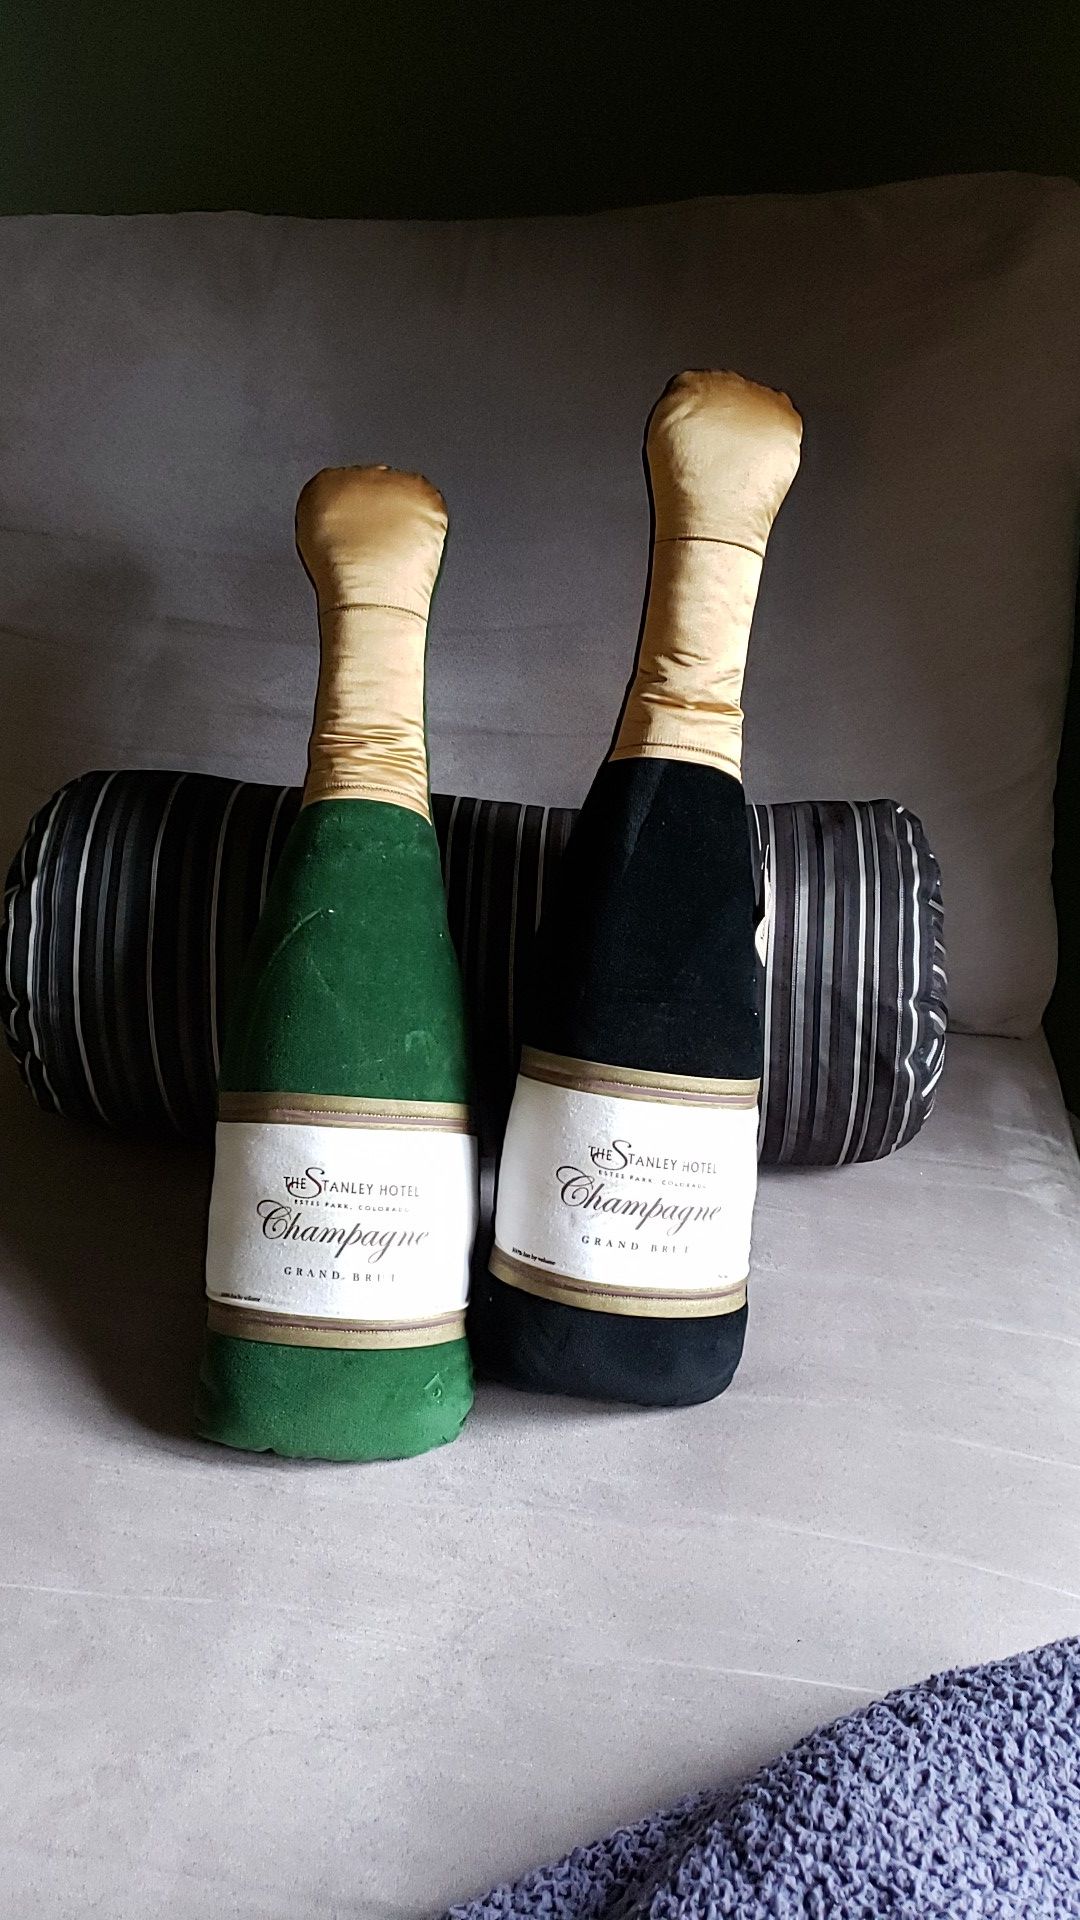 Sofa pillows, champagne bottle.shaped